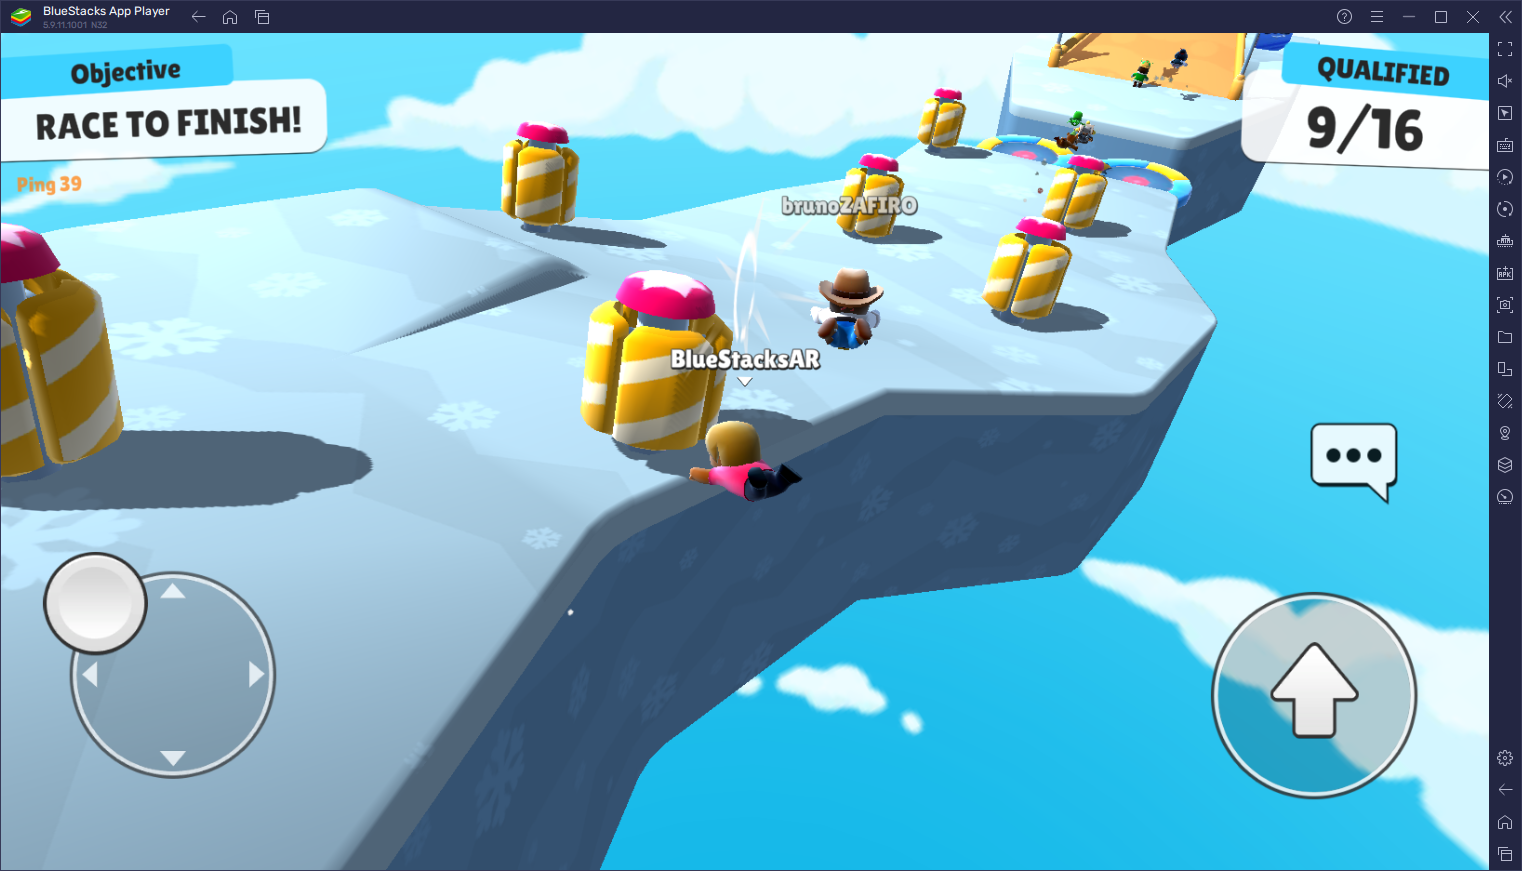 Stumble Guys on PC With BlueStacks Now Playable at a Stunning 240 FPS